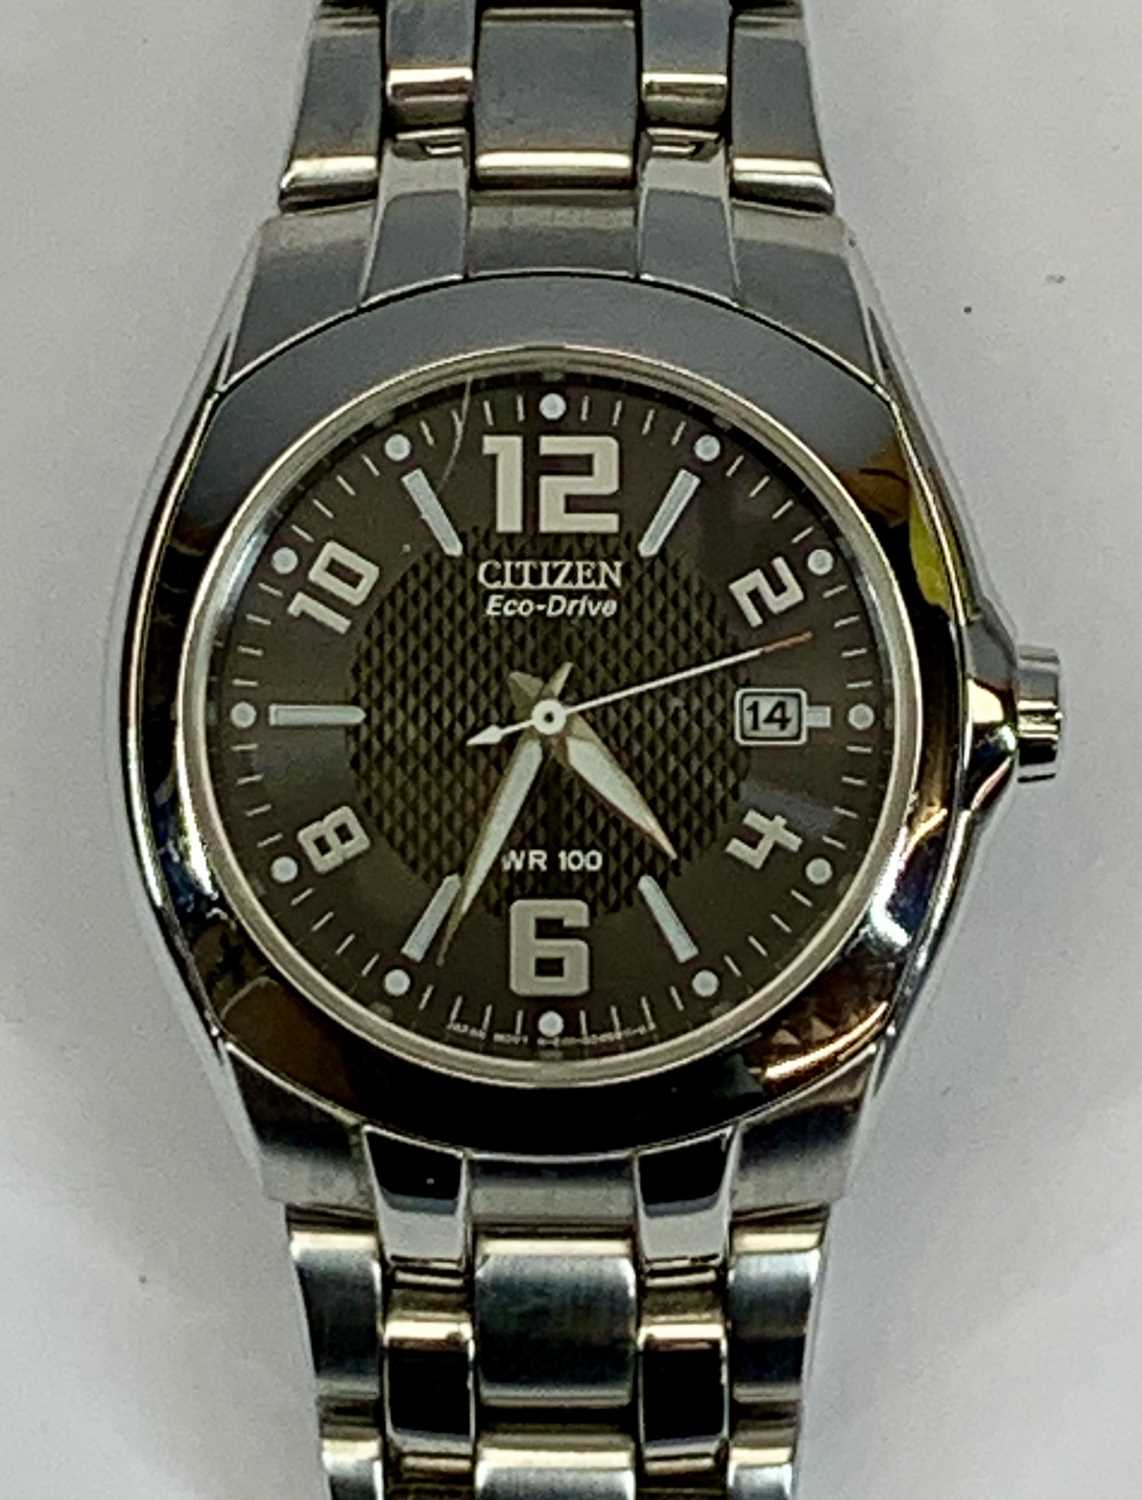 CITIZEN ECODRIVE WR100 WRISTWATCH - 38mm stainless steel case, black dial with Arabic and baton hour